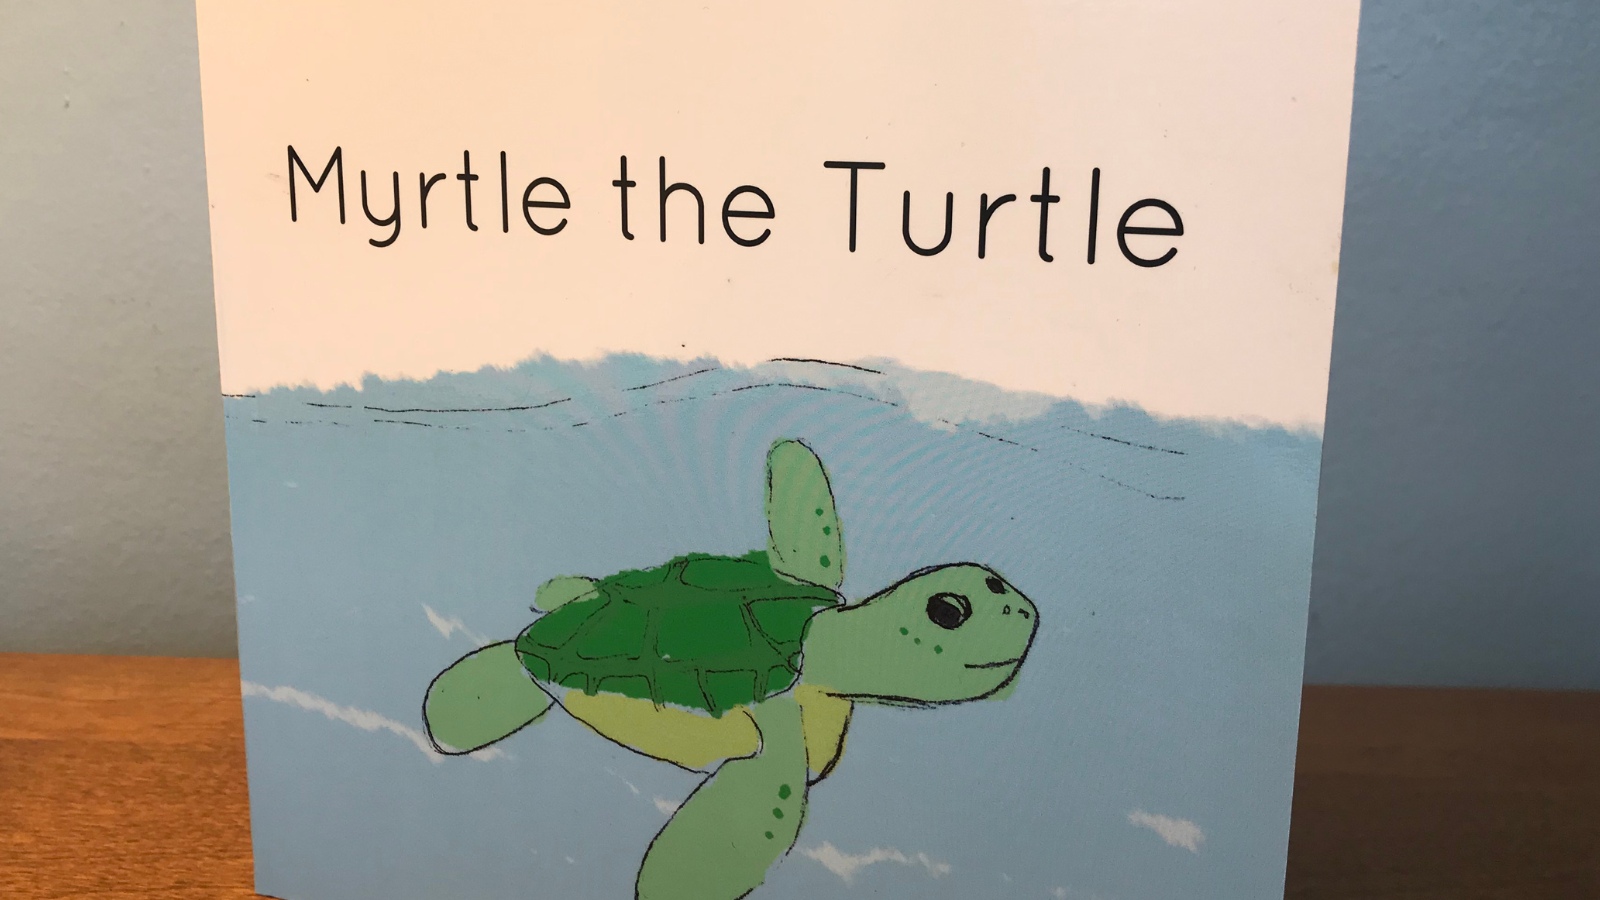 Cover of Myrtle the Turtle children's book.